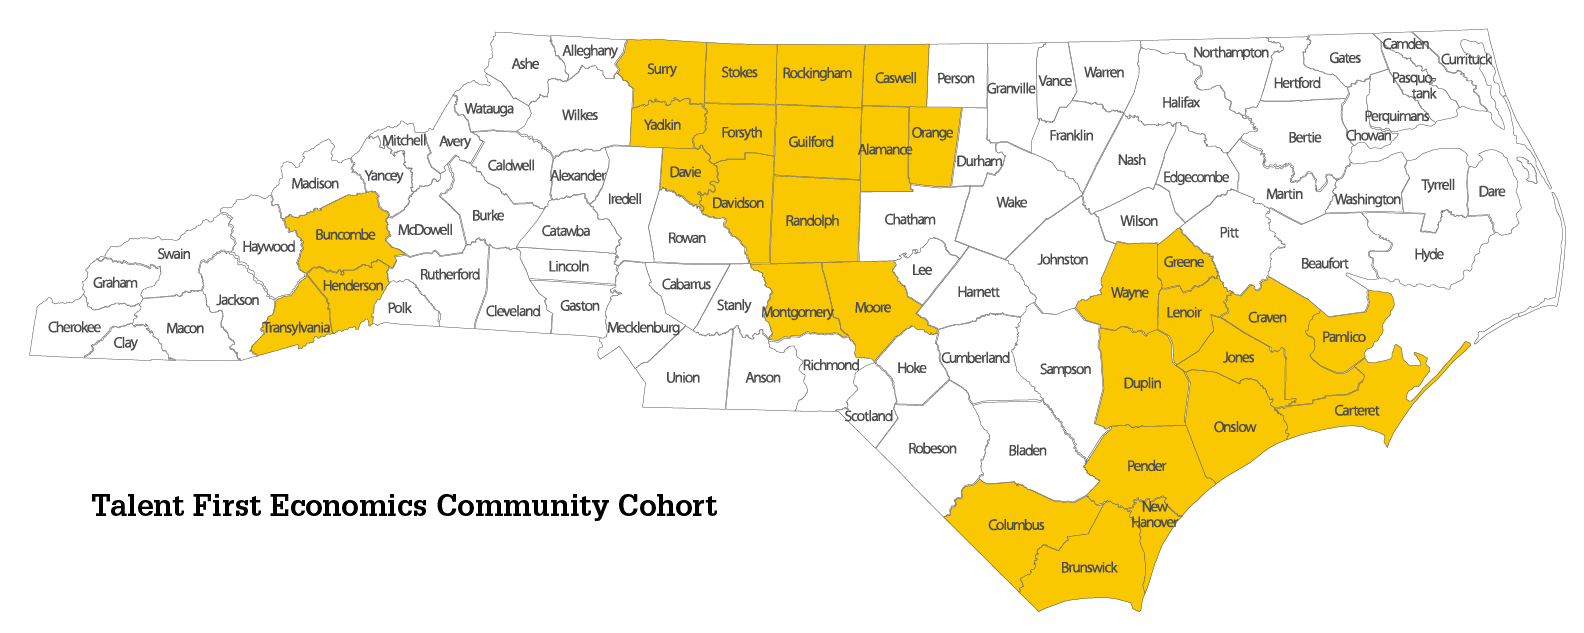 A map of North Carolina with counties highlighted that are included in the Talent First Economics community cohort